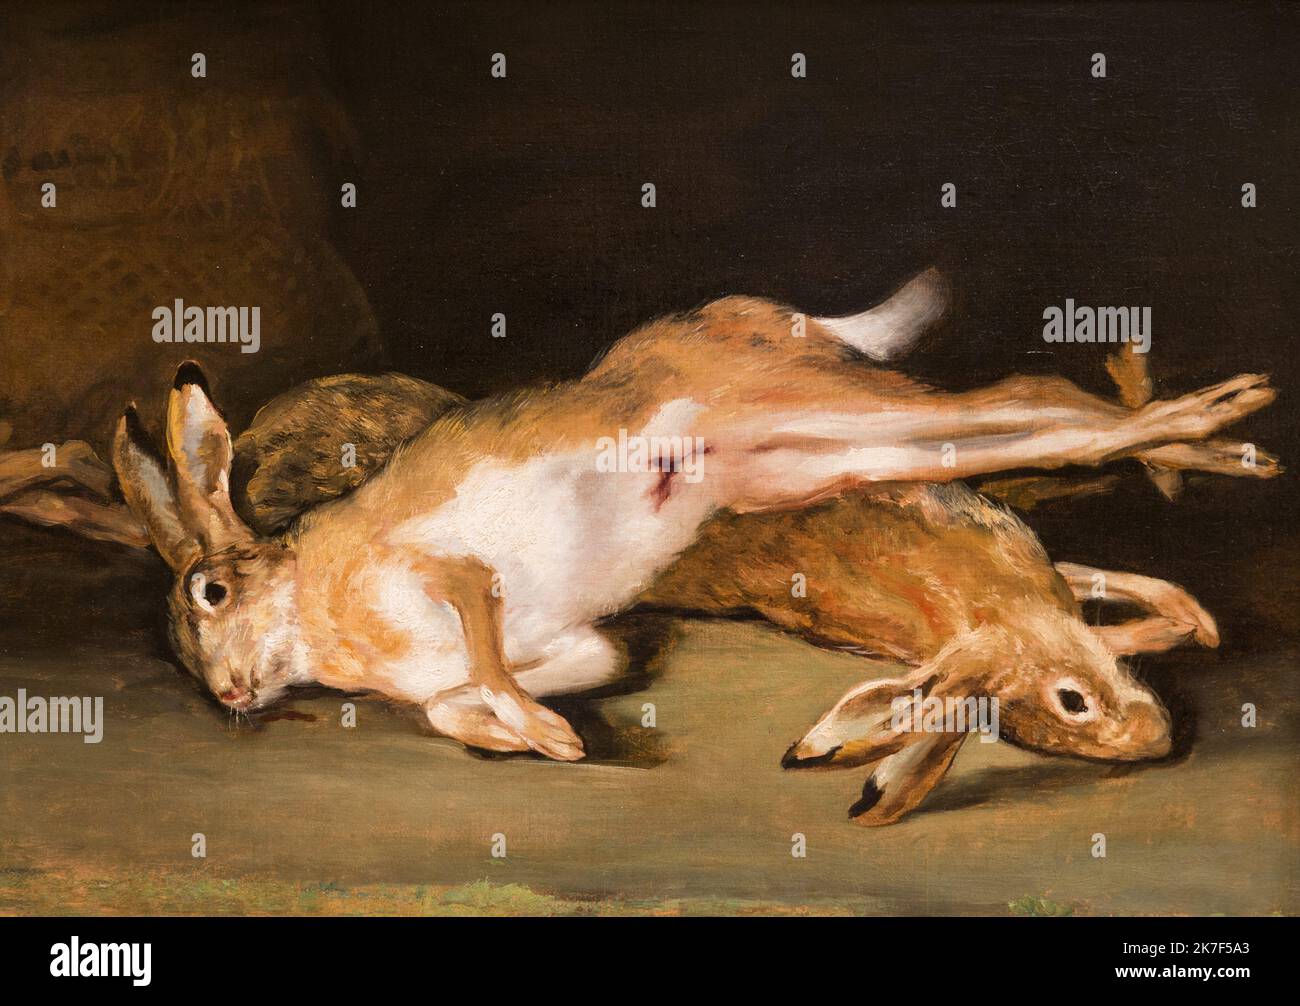 ©Active Museu/MAXPPP - ActiveMuseum 0000749.jpg / Nature Morte avec des Lievres Morts, 1820 - Goya - Still Life with Died Harres 1820 - / Goya / Peinture Active Museum / Le Pictorium Animal ,Death ,Game ,Hare ,Horizontal ,Hunting ,Romanticism ,Still-life (Composition) ,19th century ,Goya ,Painting ,  Stock Photo